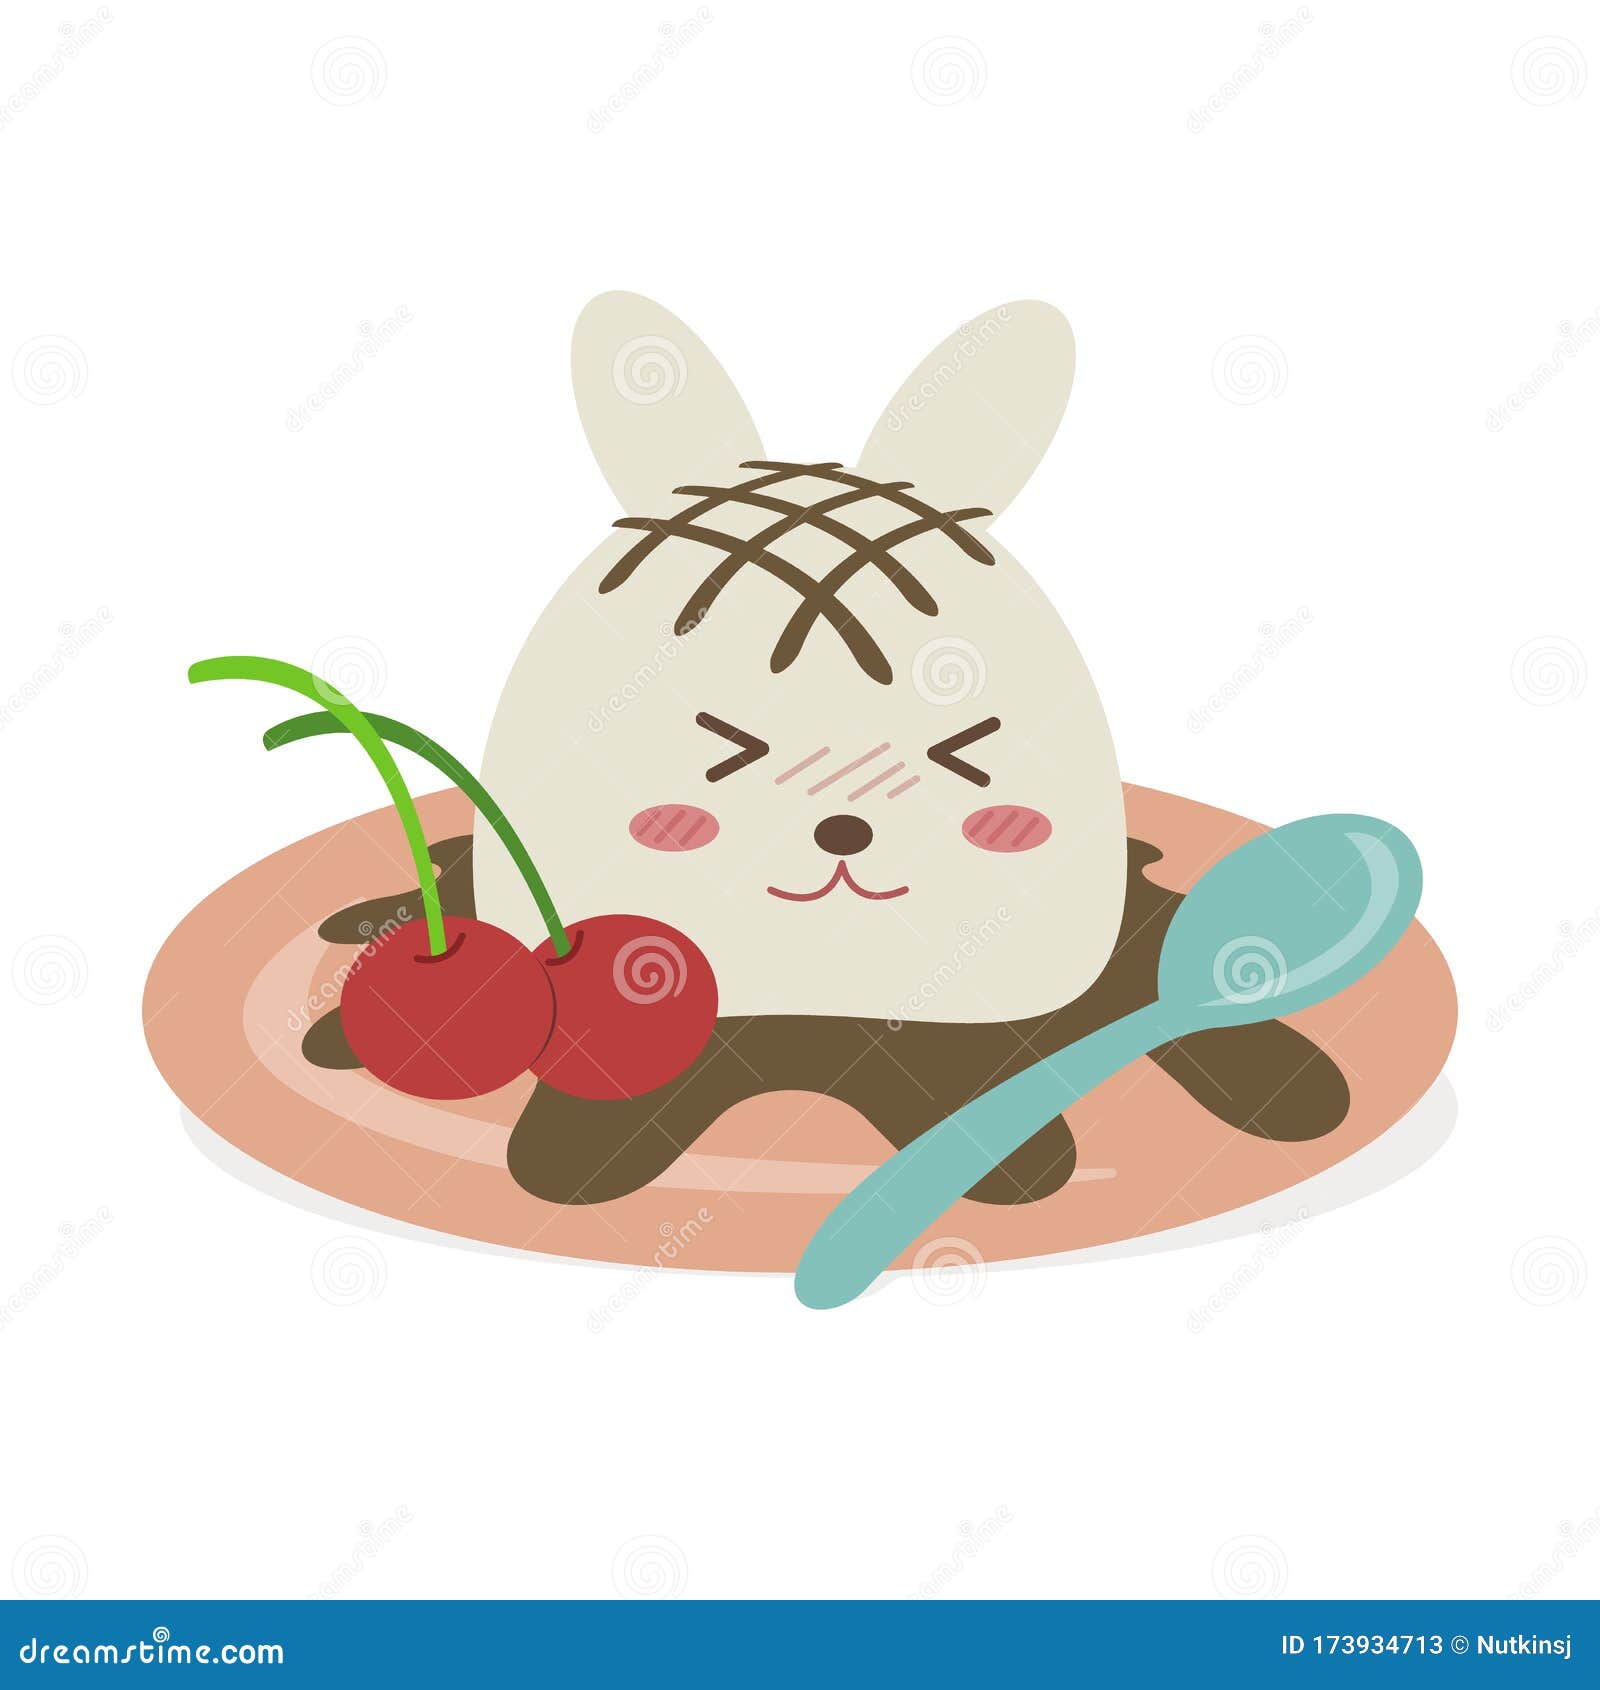 Cute Stamps Bear and Bunny stock vector. Illustration of cute - 134122906